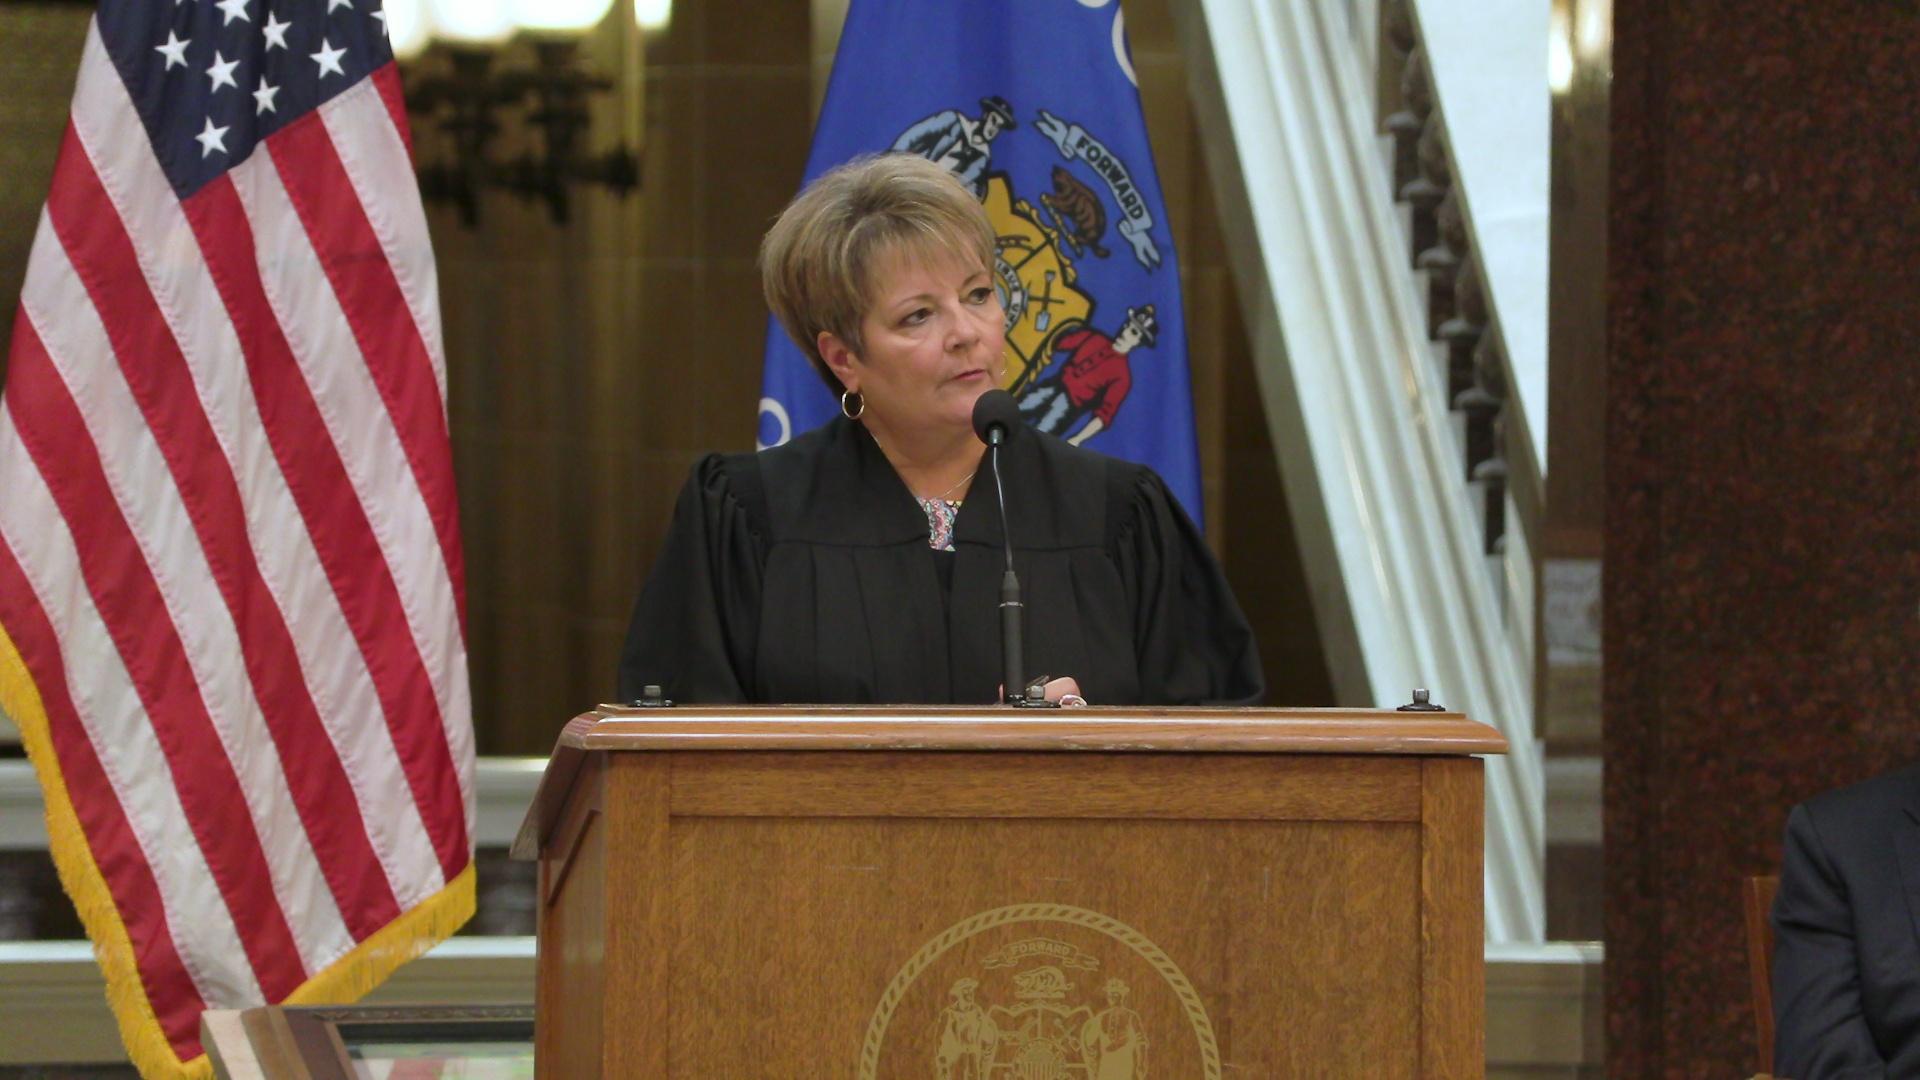 Janet Protasiewitcz dressed in a black gown stands behind a wooden podium and microphone with the U.S. and Wisconsin state flags on each side of her.